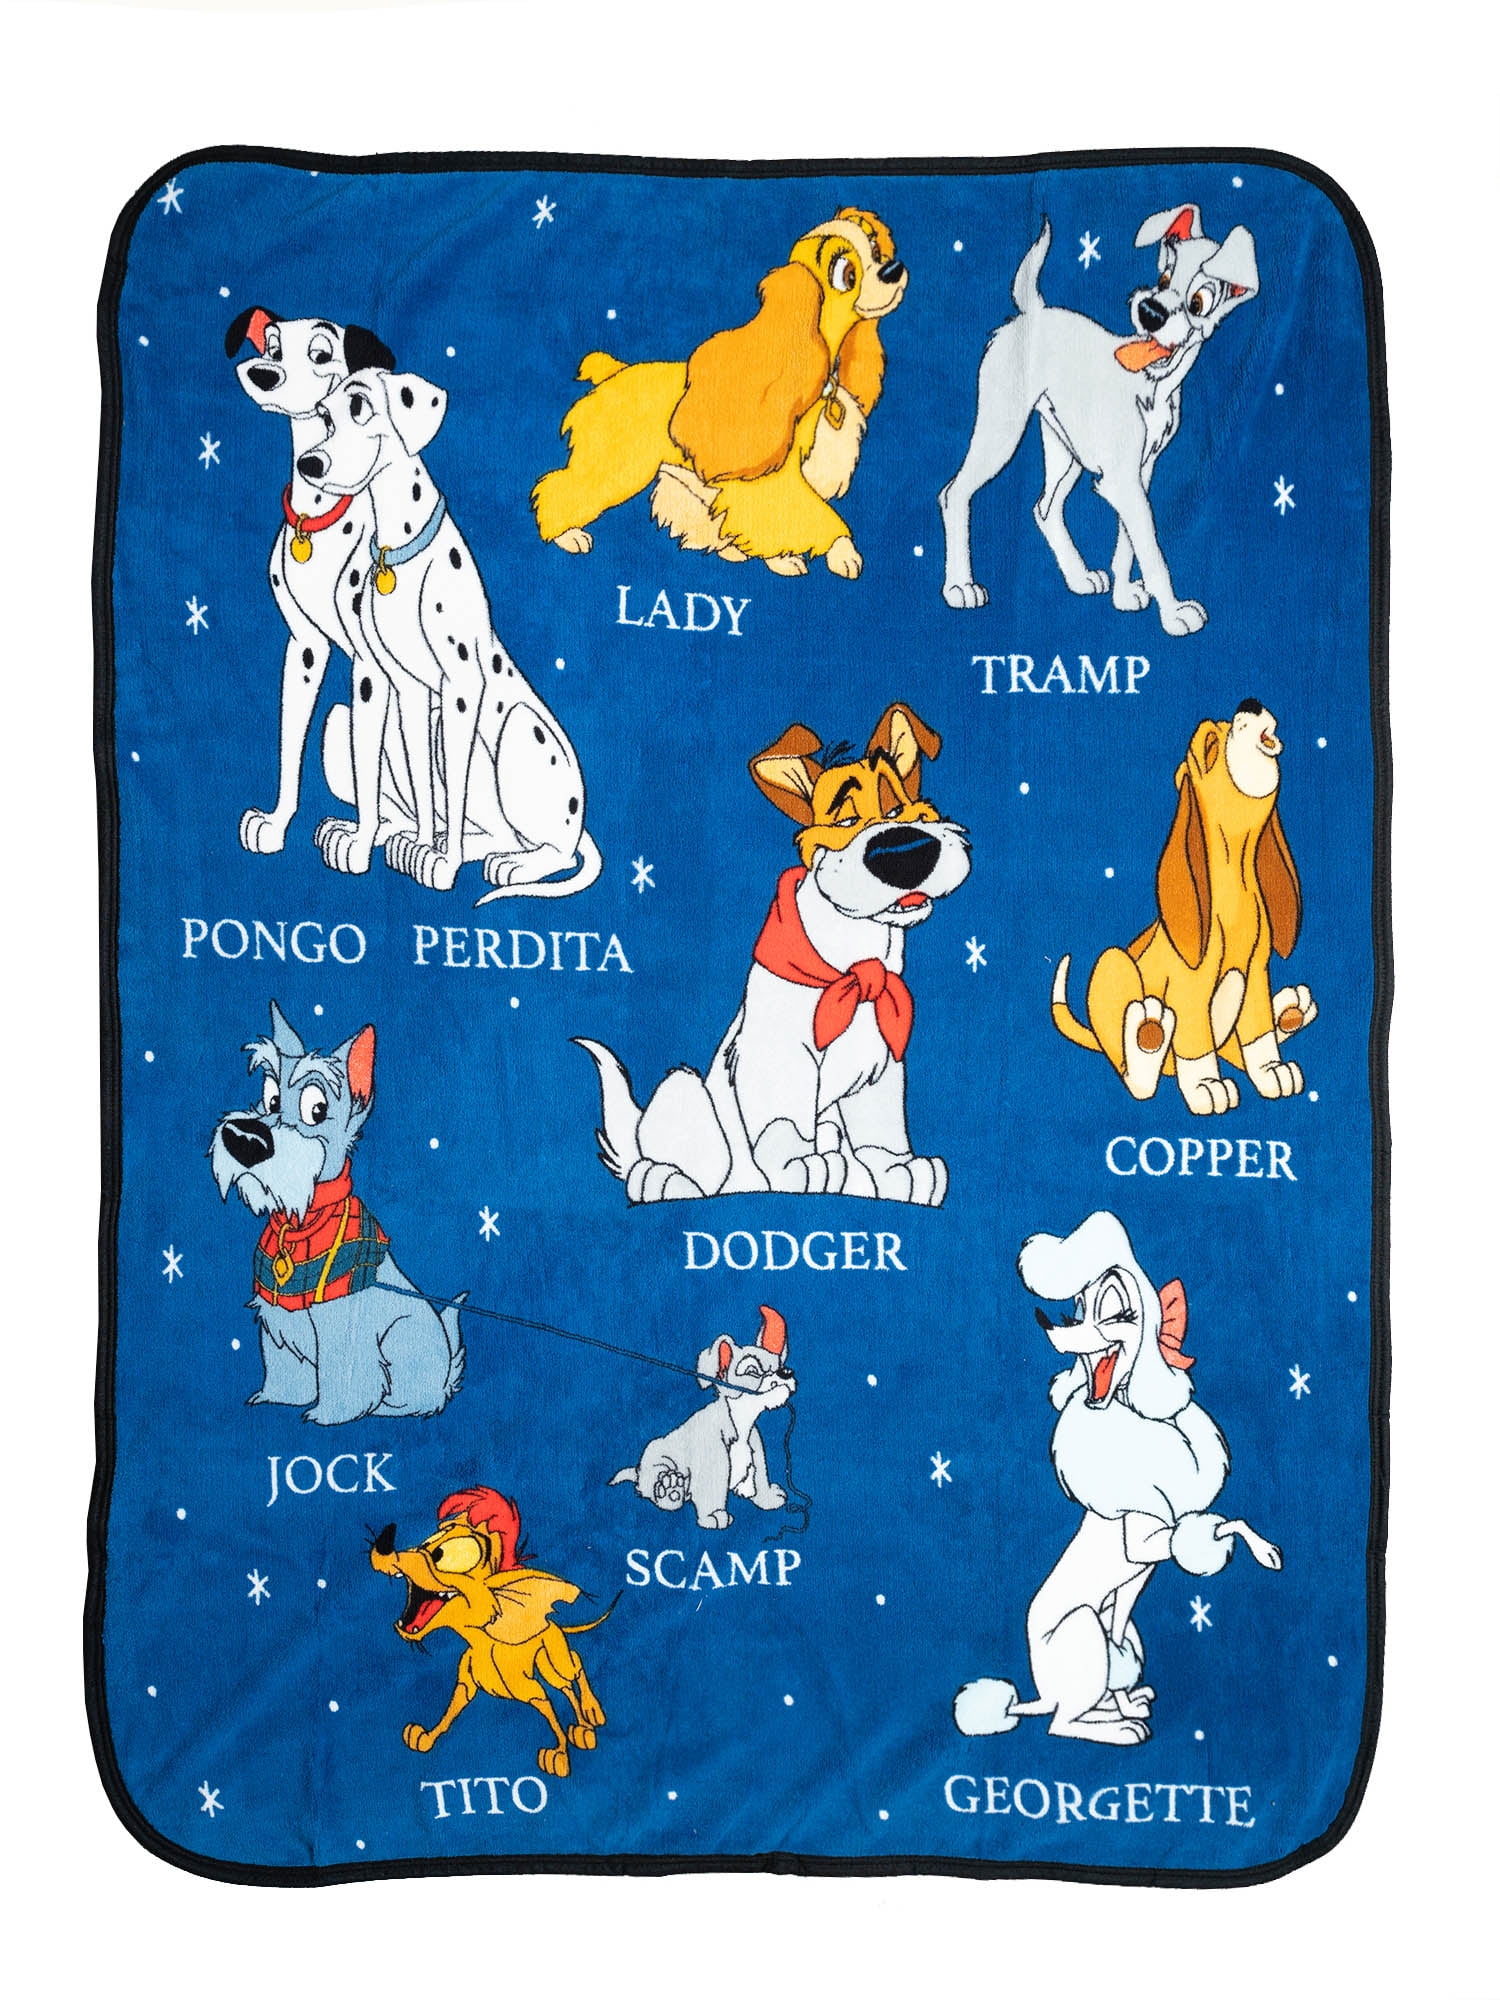 30 x 40 Inches Breathable Flannel Blanket Cozy Home Blanket Alarm Fire Fighter Dalmatian Dog Pattern Multiple Colors Available Air-Conditioned Quilts for Bed Room 